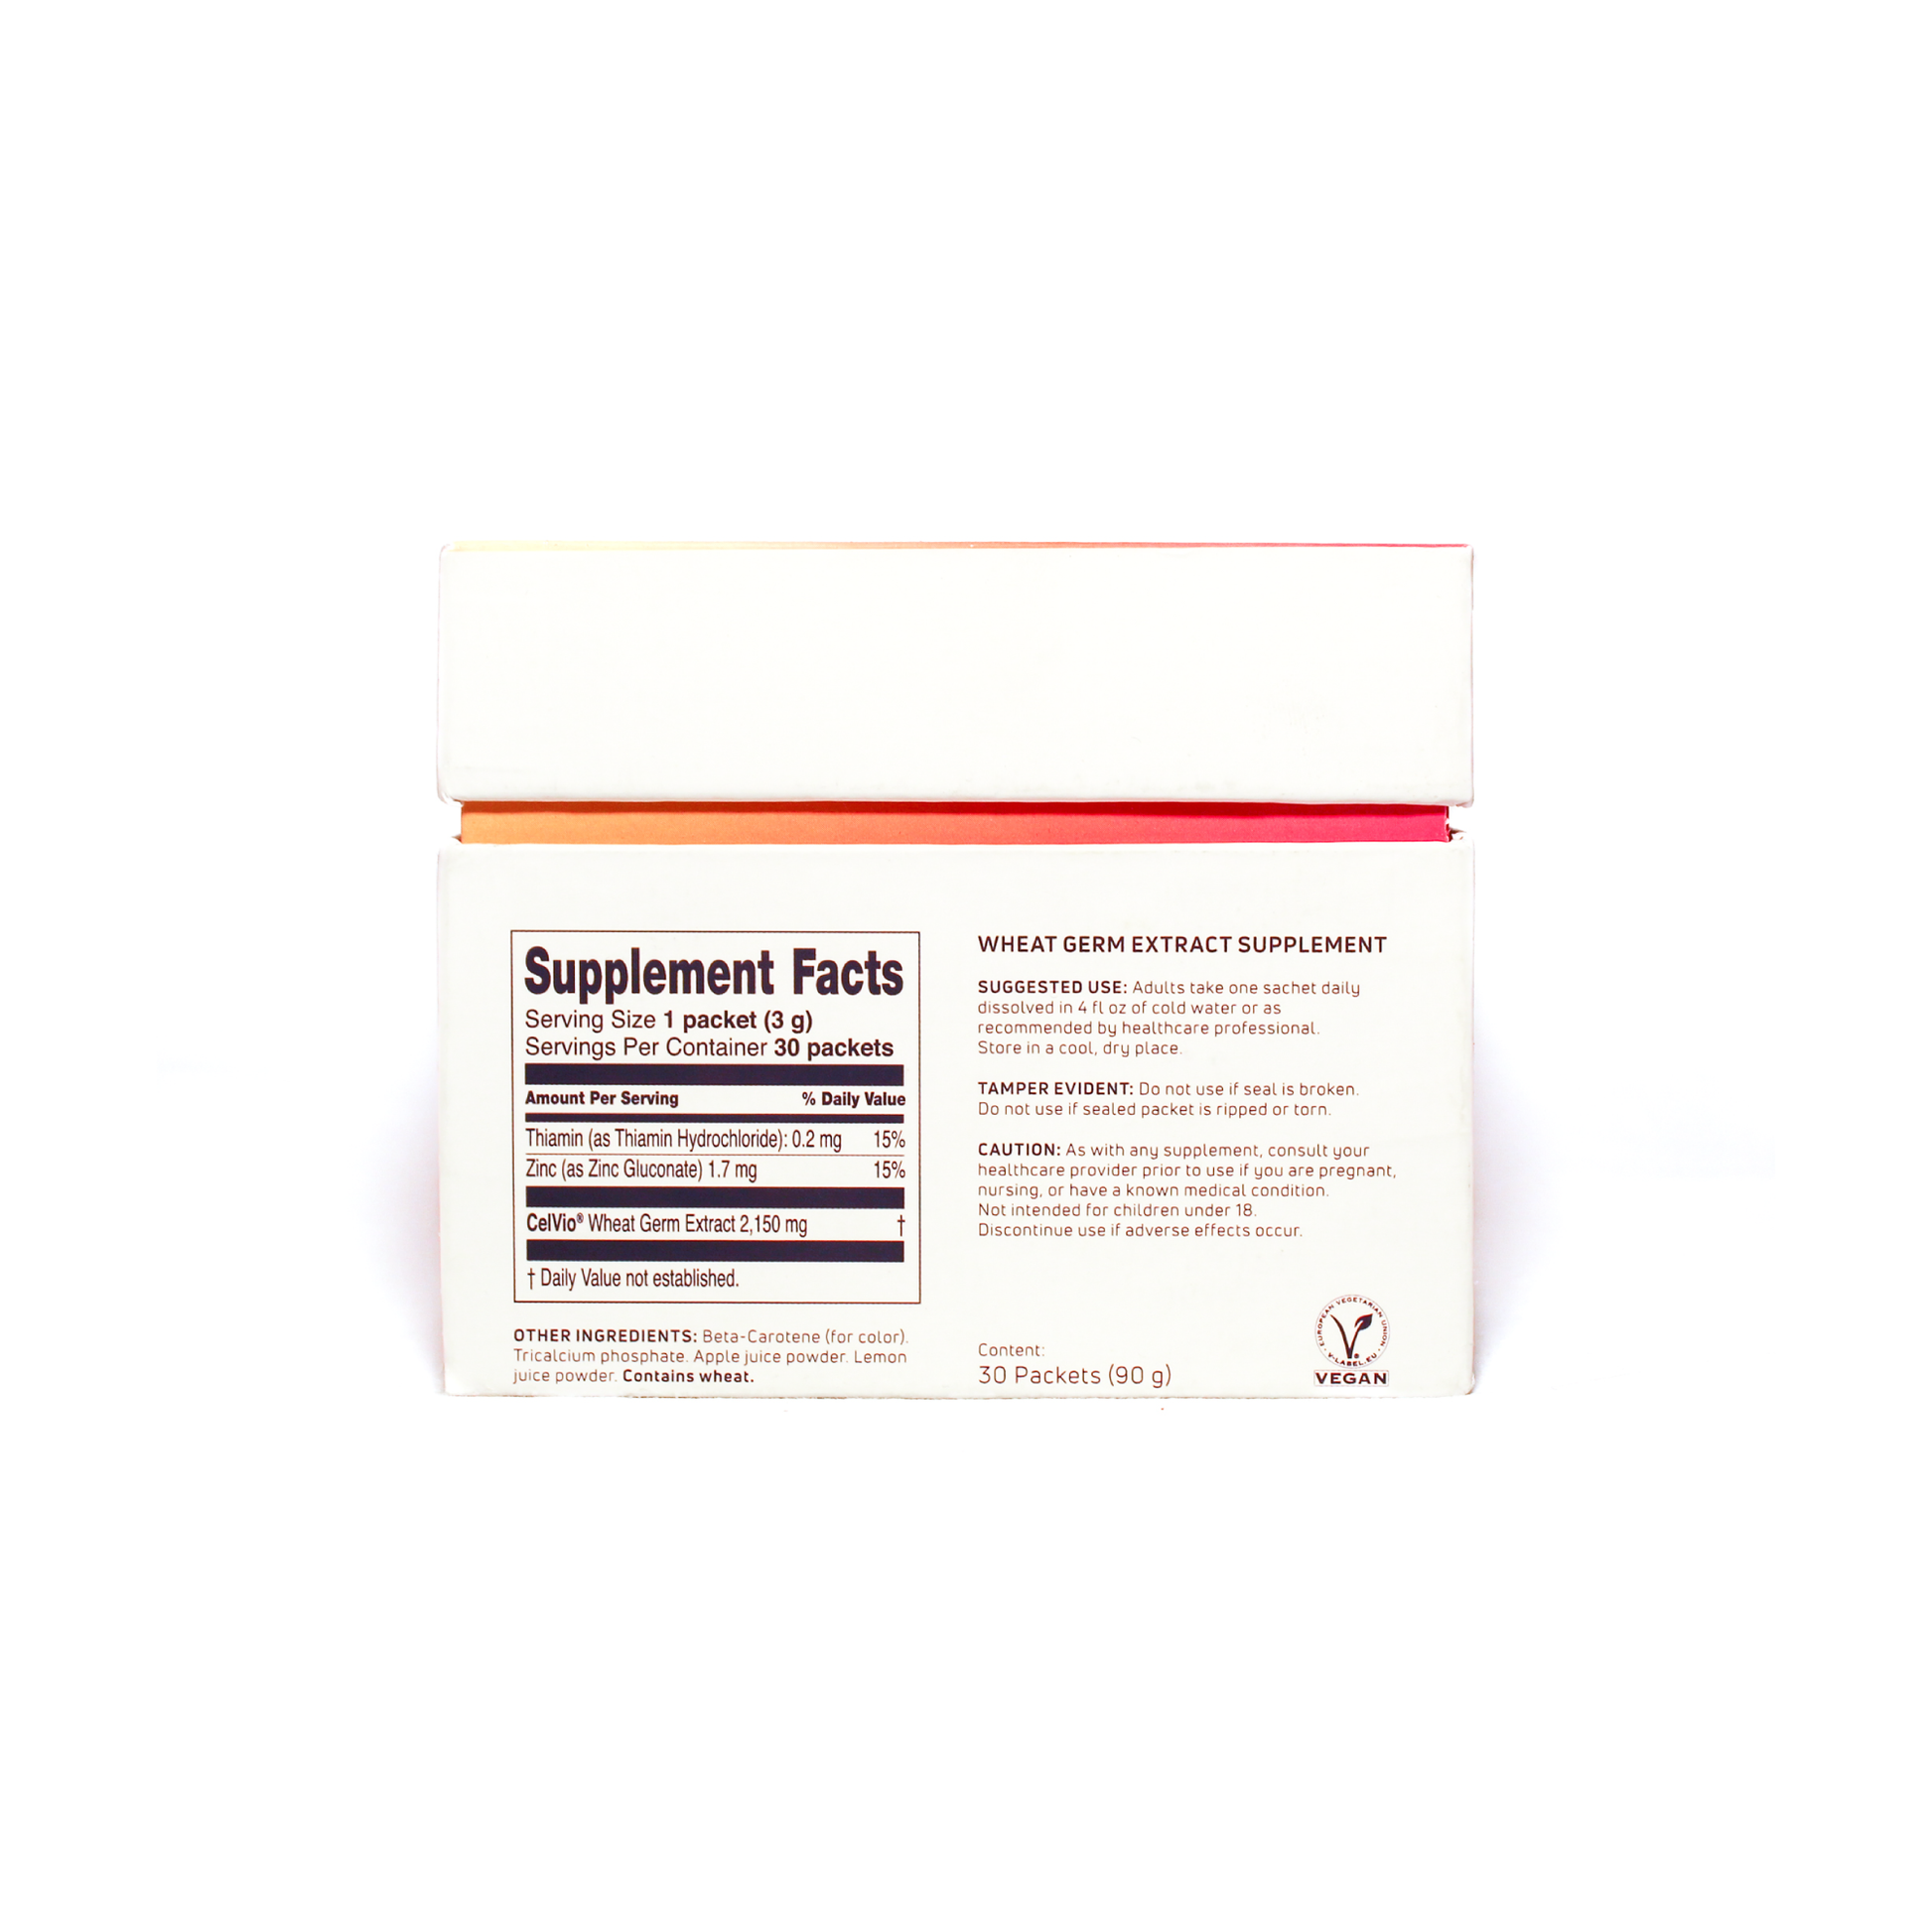 A box of spermidineLIFE® Ultra+ 2150mg Dietary Supplement by Longevity Labs, Inc on a white background.